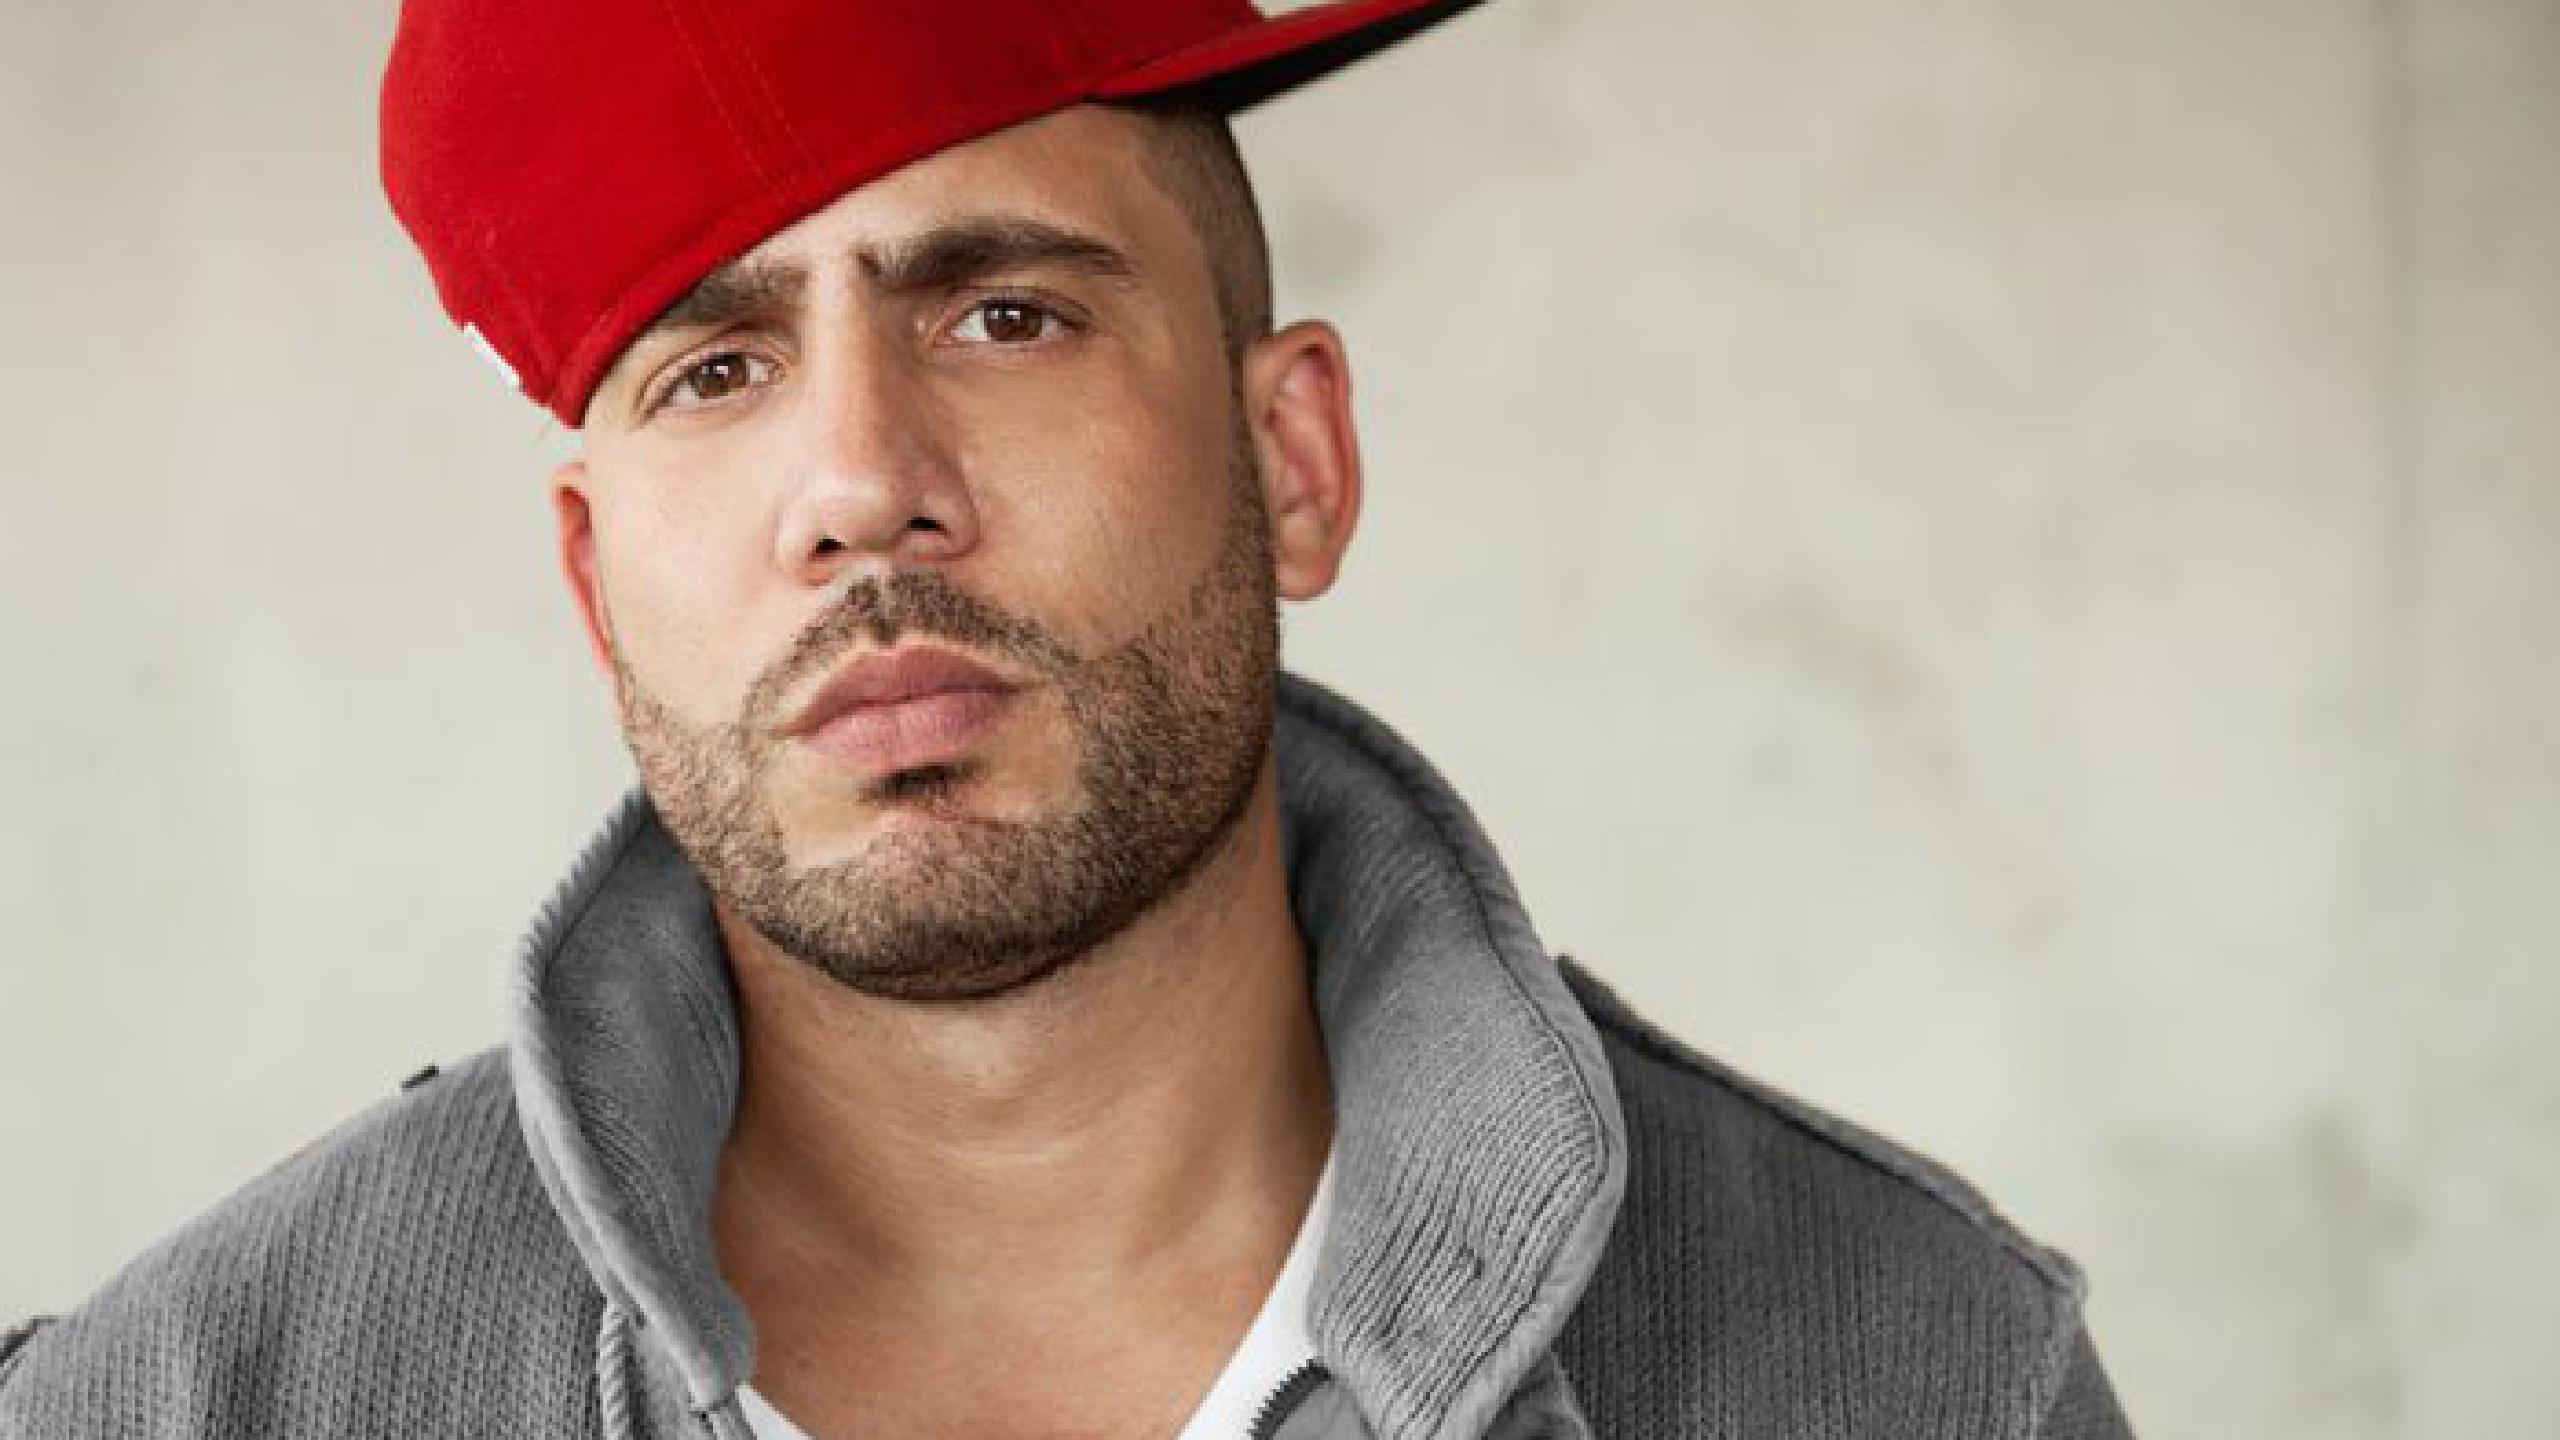 DJ Drama comes from United States and was born in 1978. 